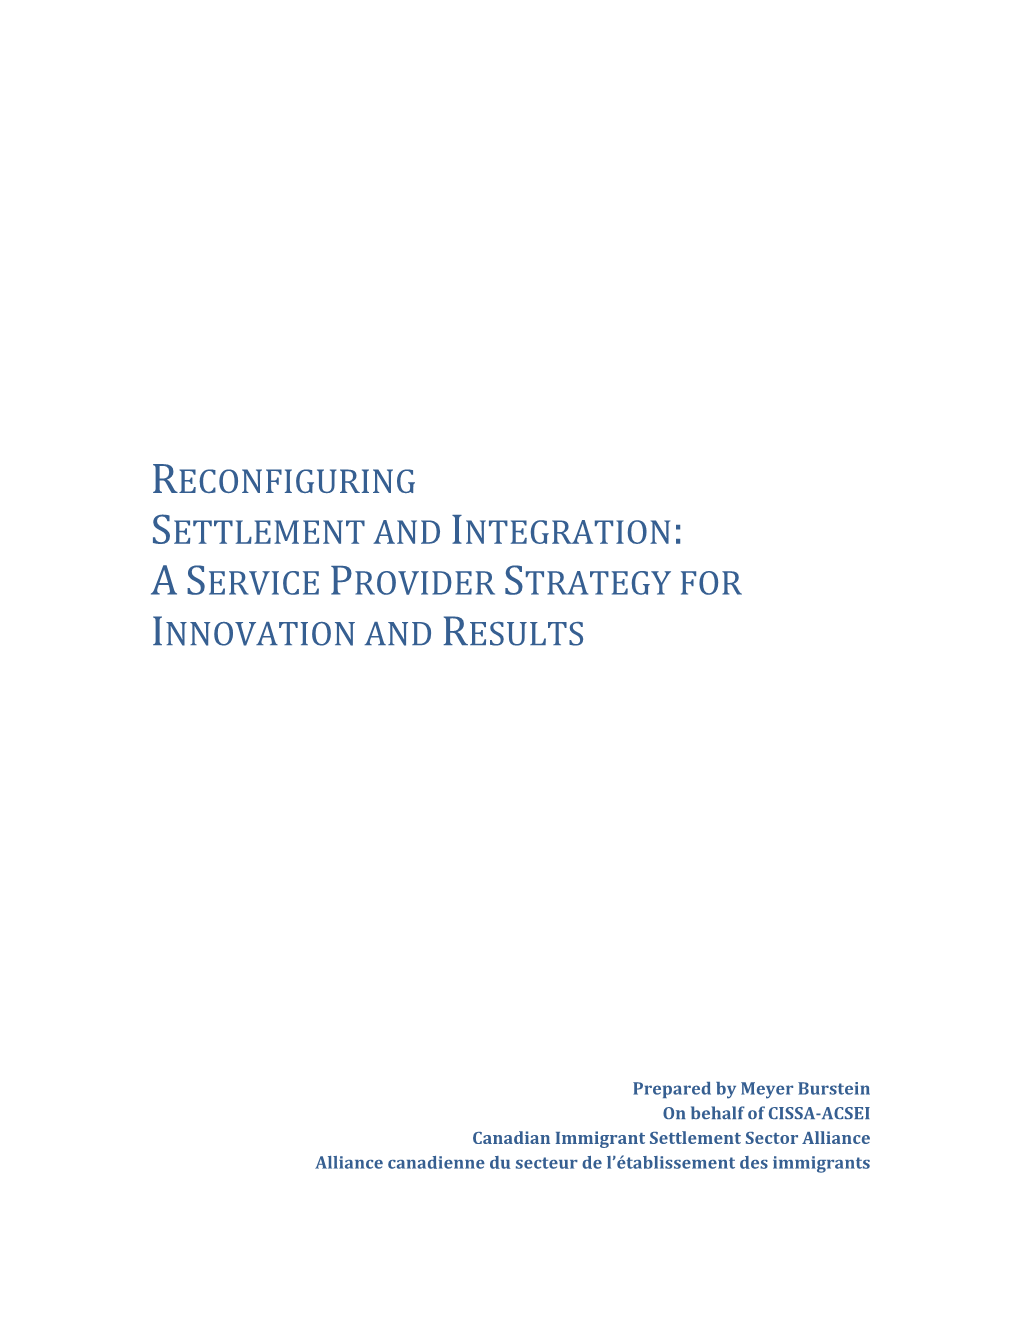 Reconfiguring Settlement and Integration: a Service Provider Strategy for Innovation and Results